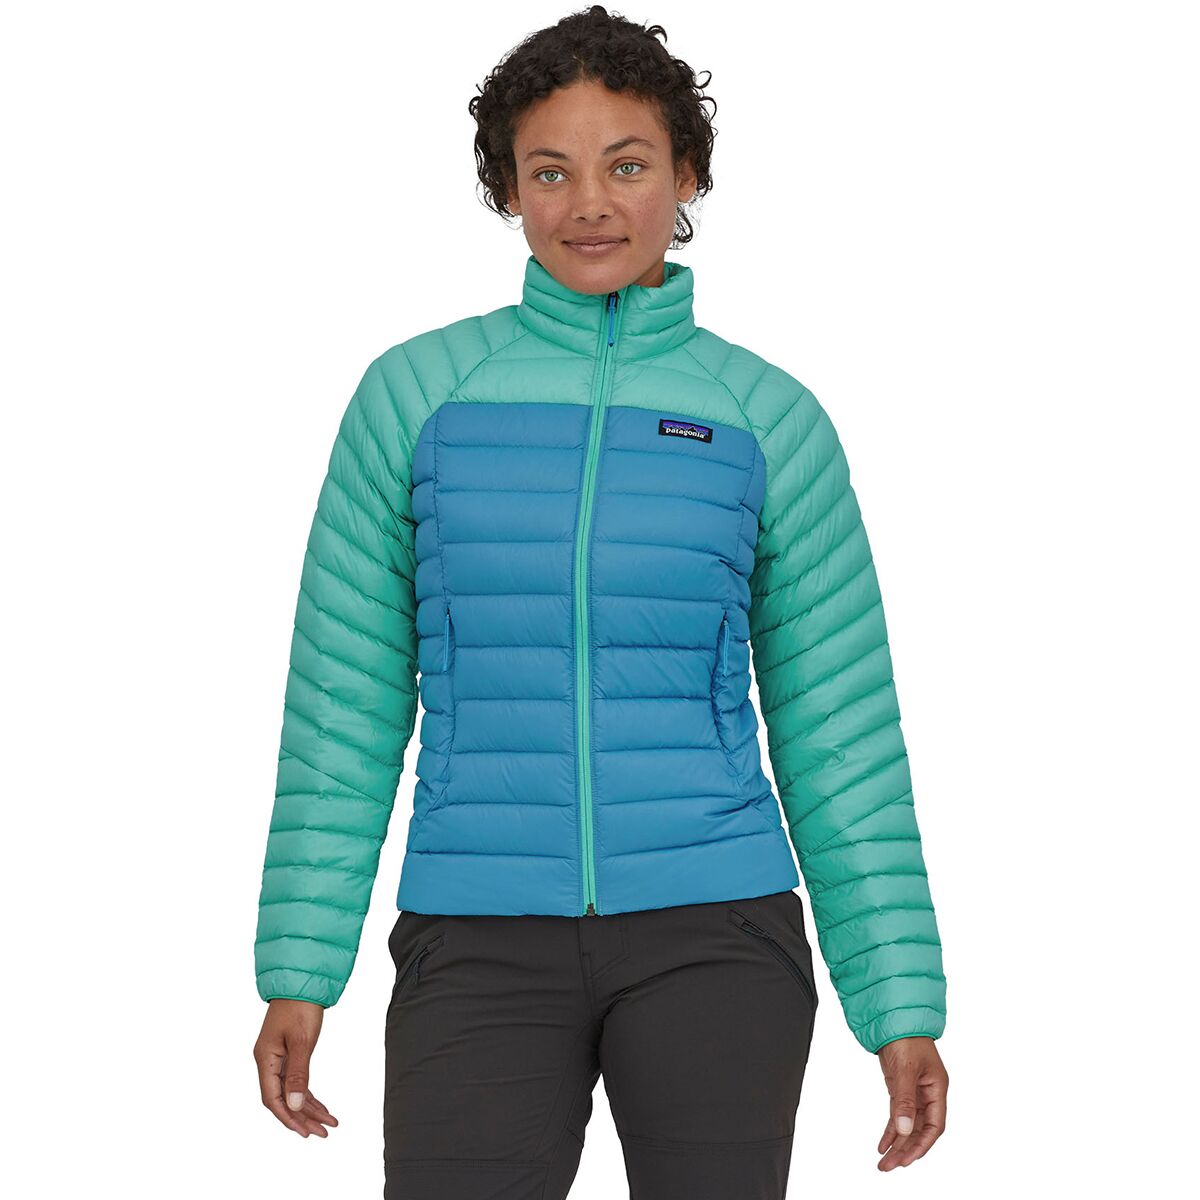 Patagonia on Sale | Steep Cheap